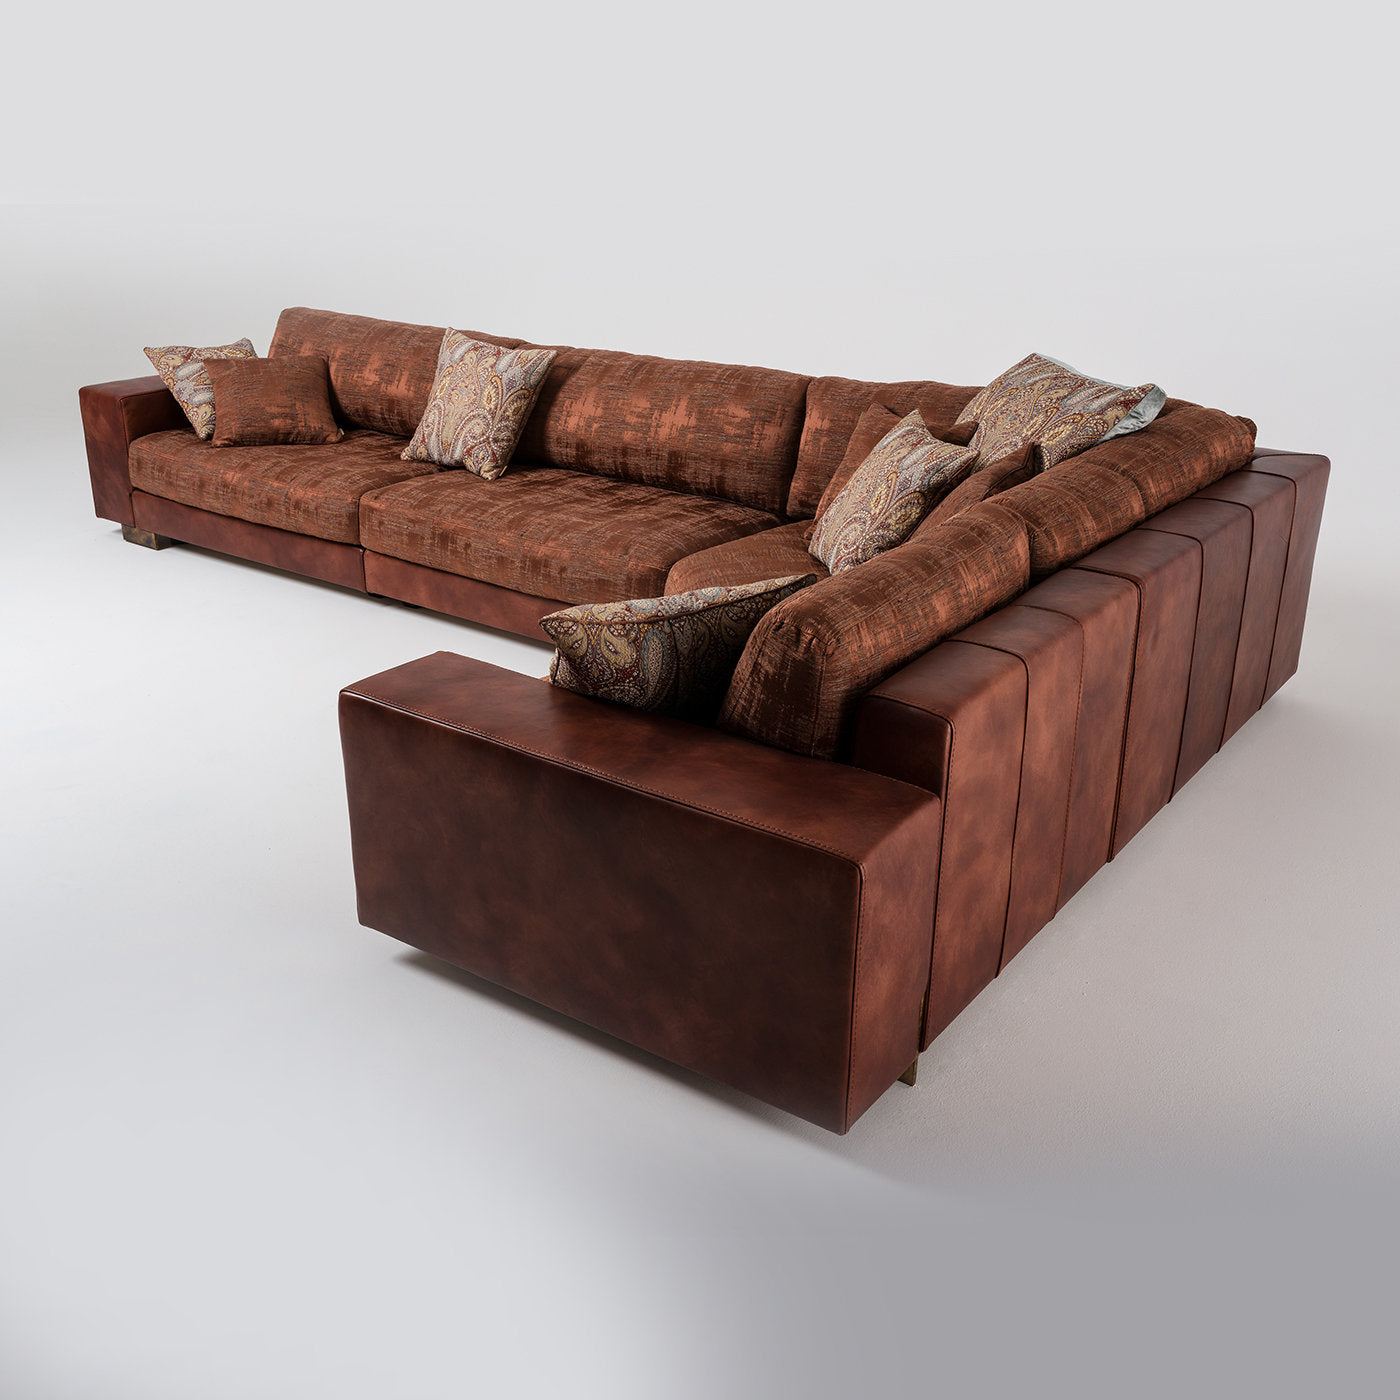 Glam Sofa Tribeca Collection by Marco and Giulio Mantellassi - Alternative view 4